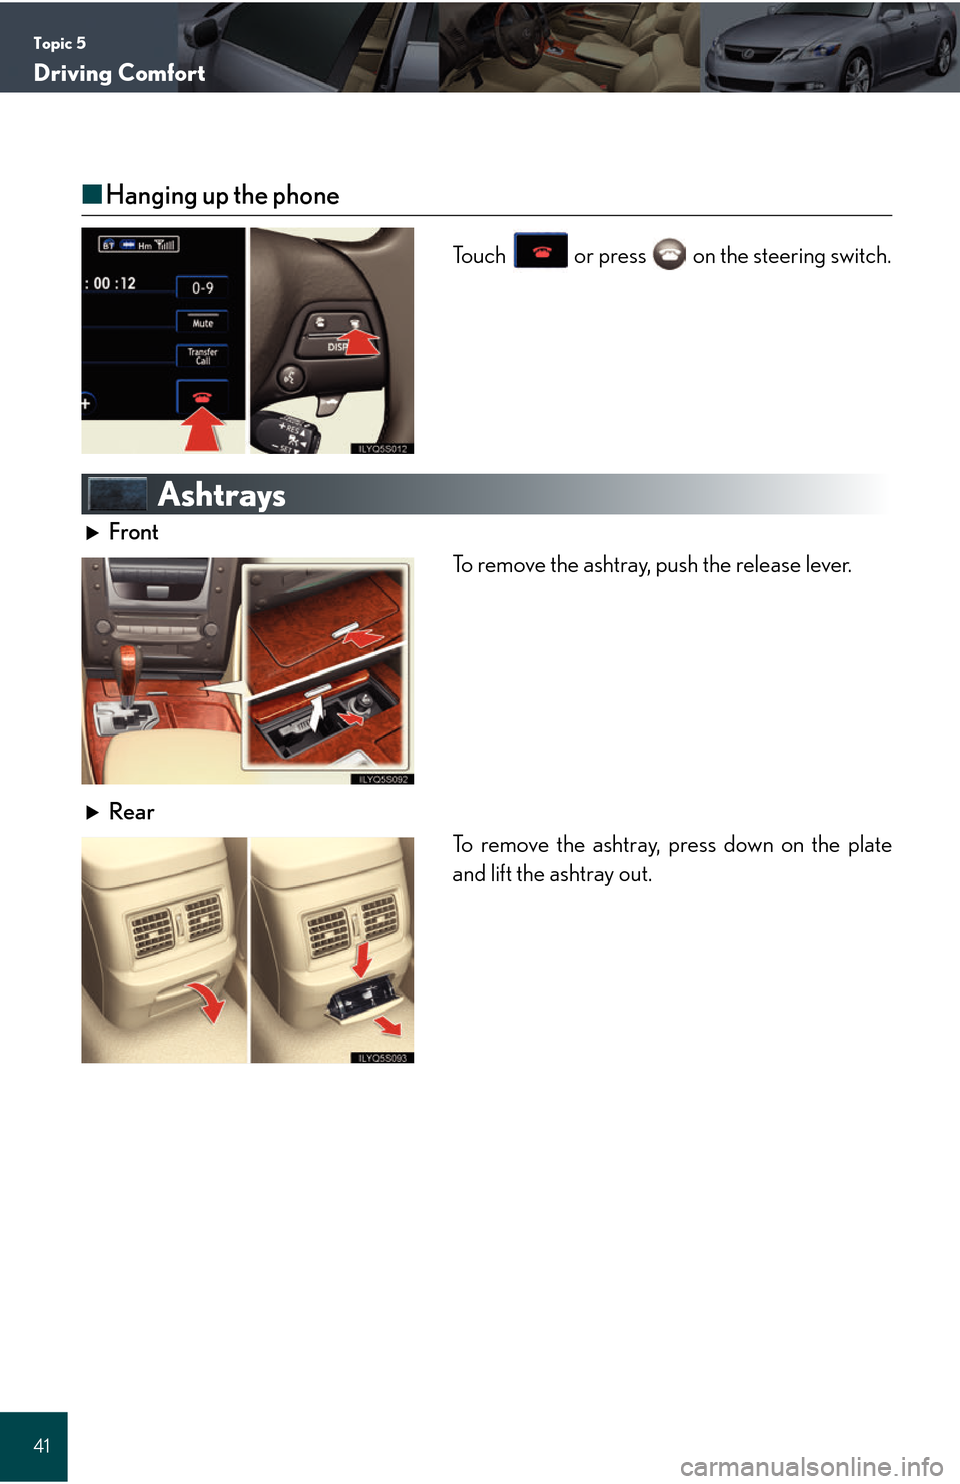 Lexus GS450h 2008  Using the audio system / LEXUS 2008 GS450H QUICK GUIDE  (OM30B13U) Service Manual Topic 5
Driving Comfort
41
■Hanging up the phone
Touch   or press   on the steering switch.
Ashtrays
Front
To remove the ashtray, push the release lever.
Rear To remove the ashtray, press down on th